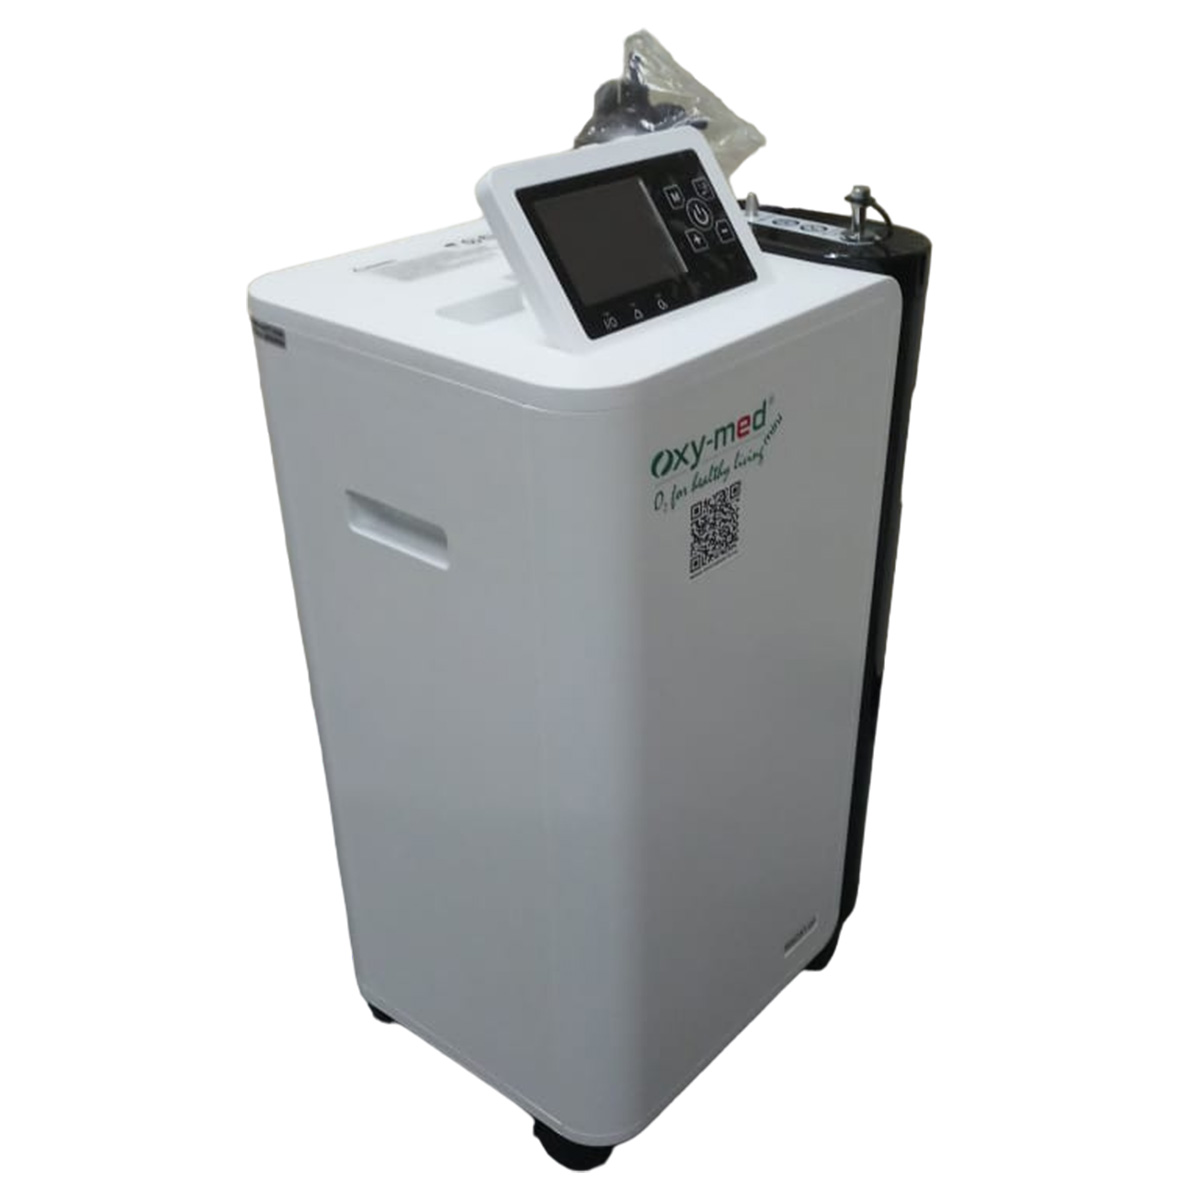 5 Lpm Oxymed Oxygen Concentrator On Sale Suppliers, Service Provider in Civil lines